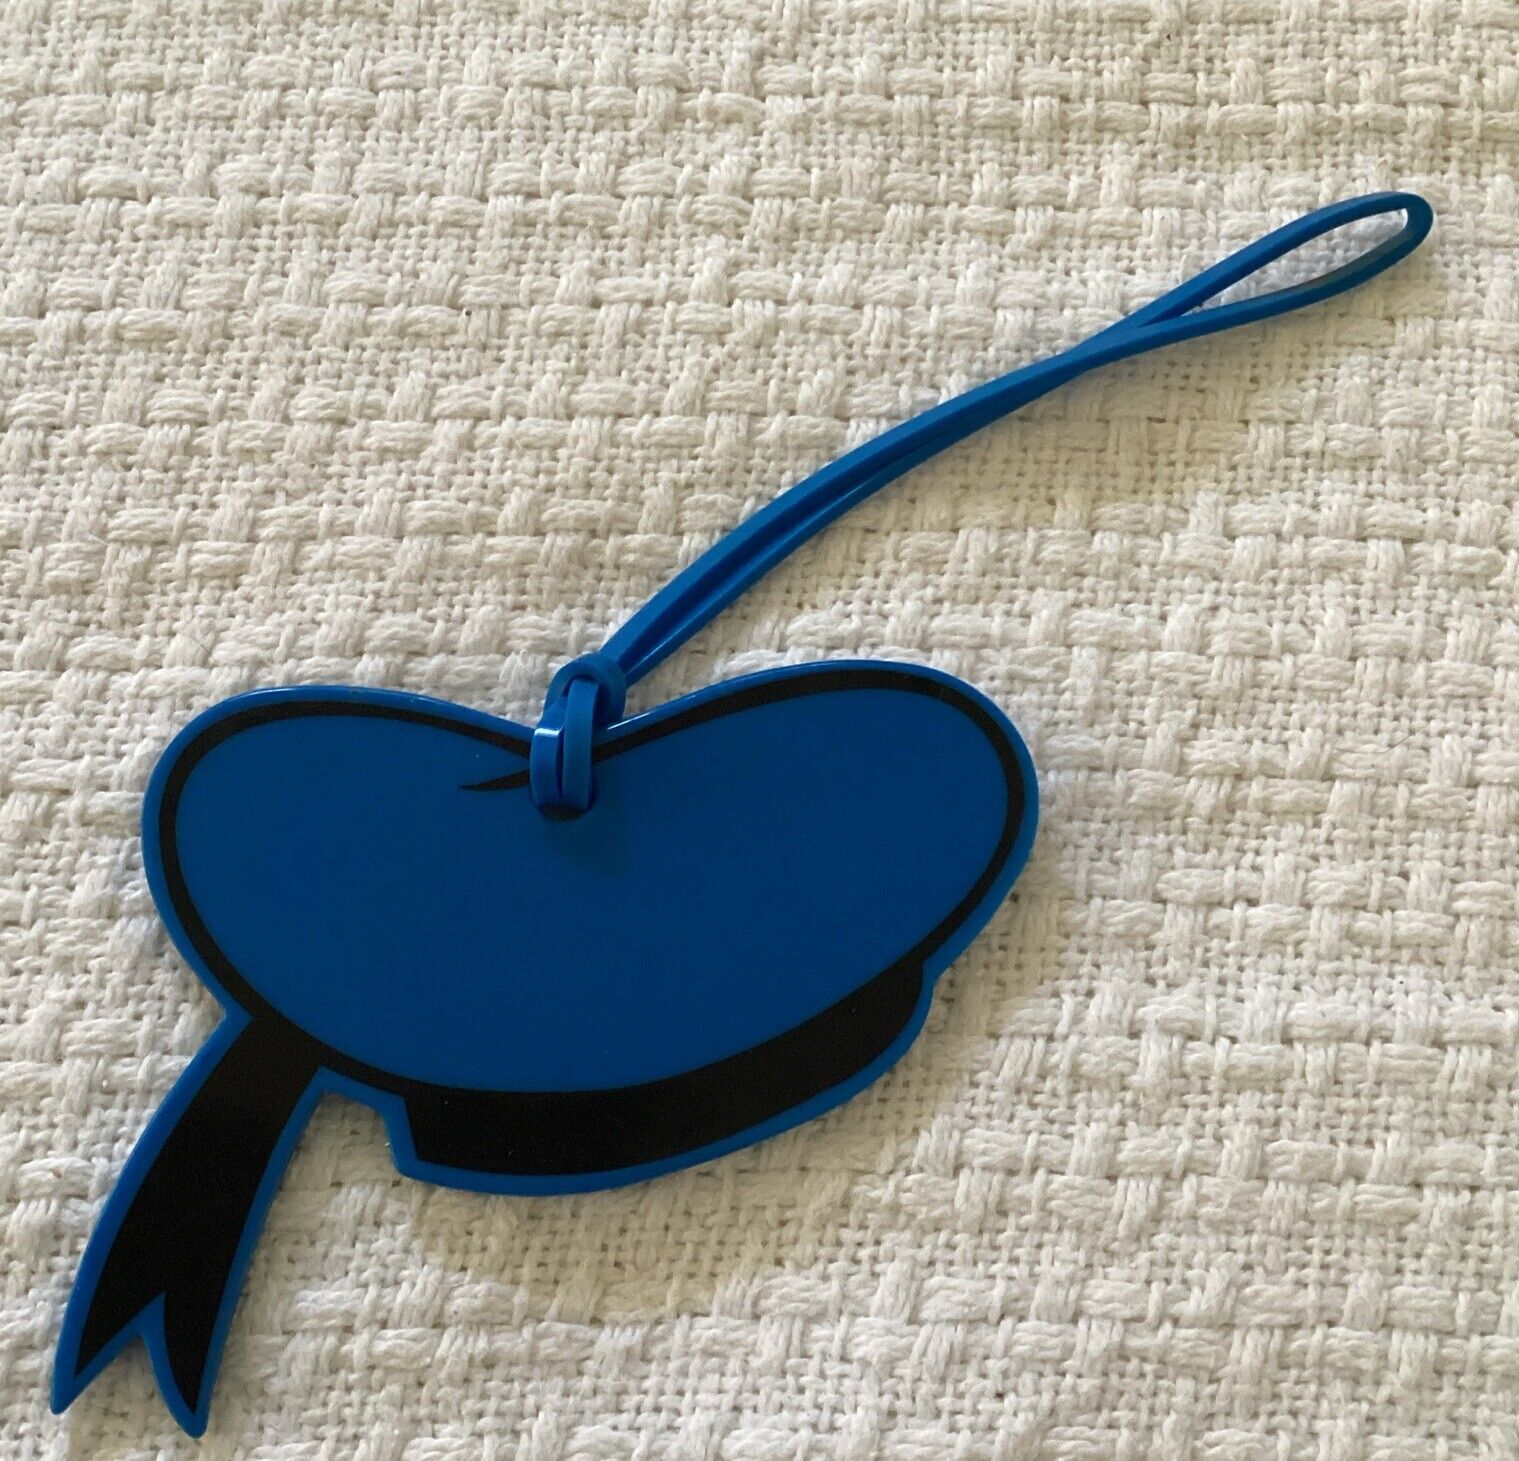 Vintage Disney DONALD DUCK HAT Luggage Tag Soft Rubber